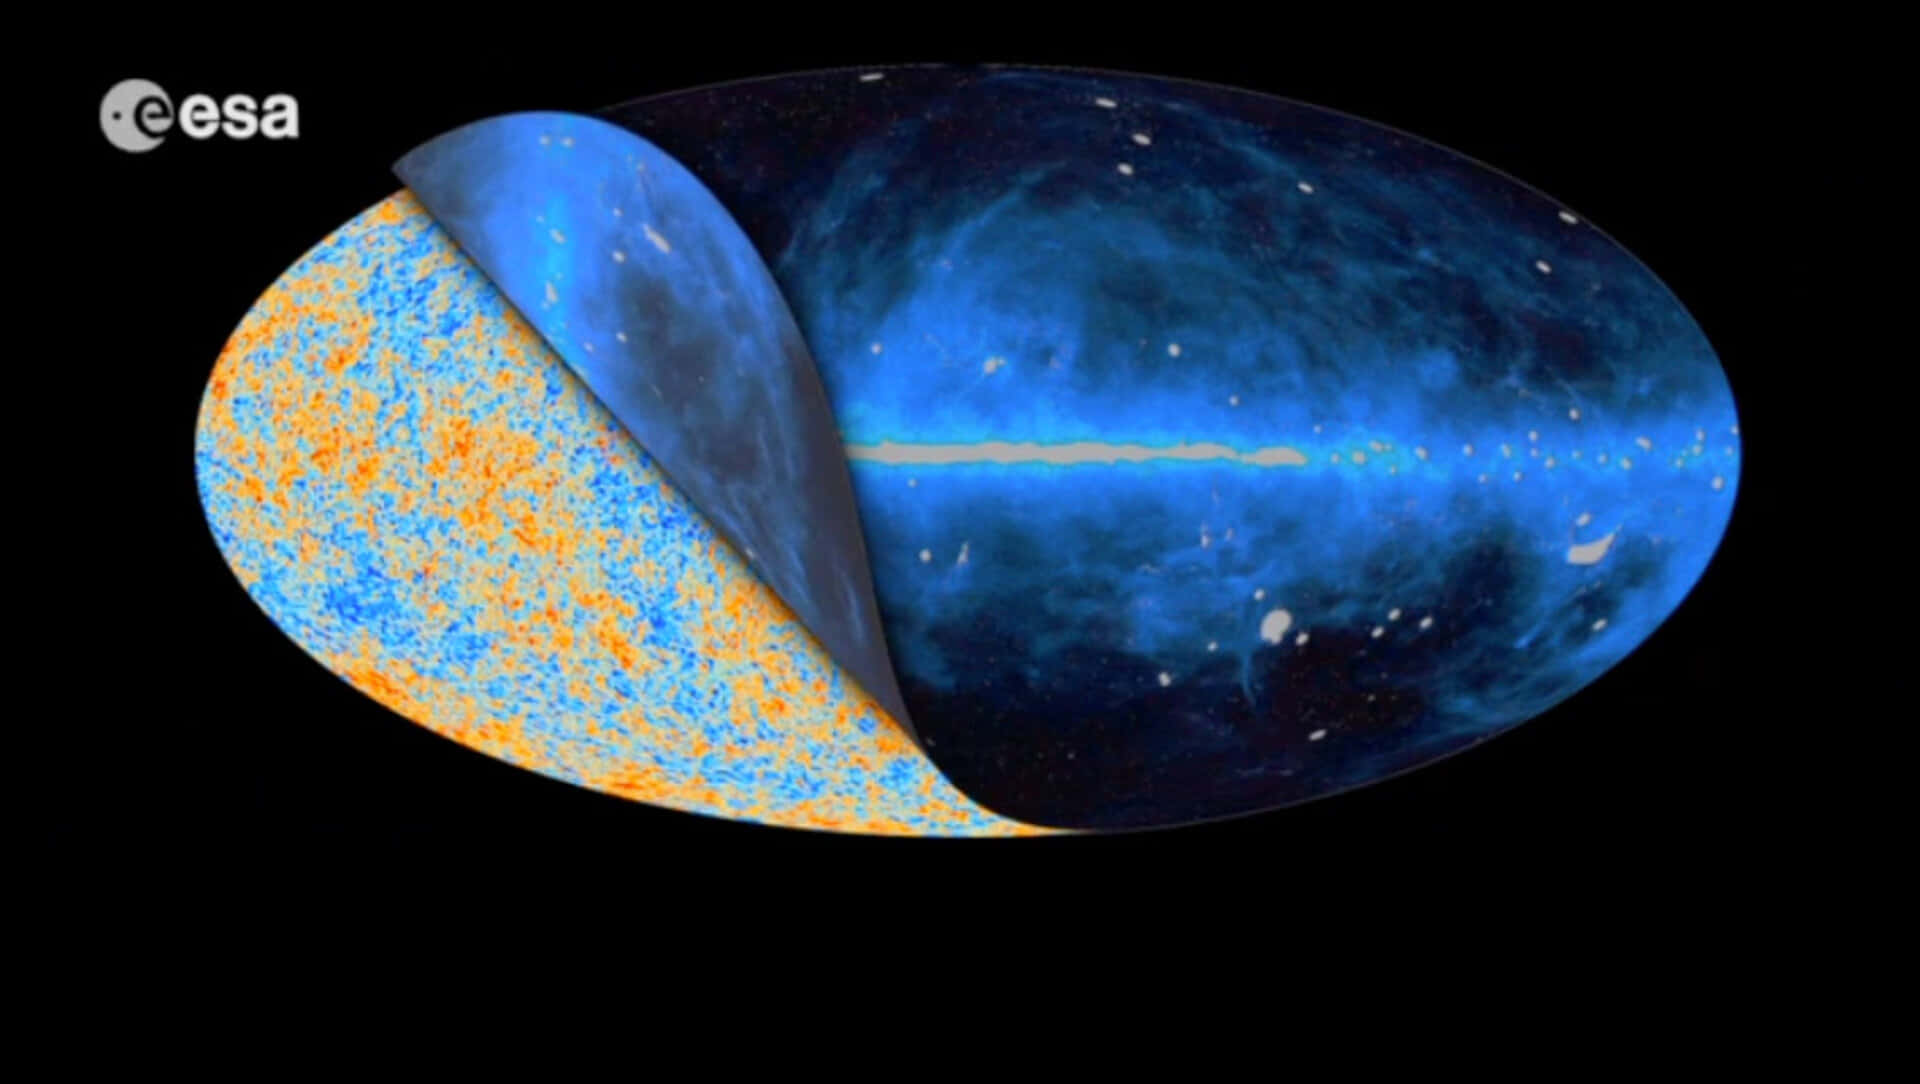 The Milky Way Is Shown In This Image